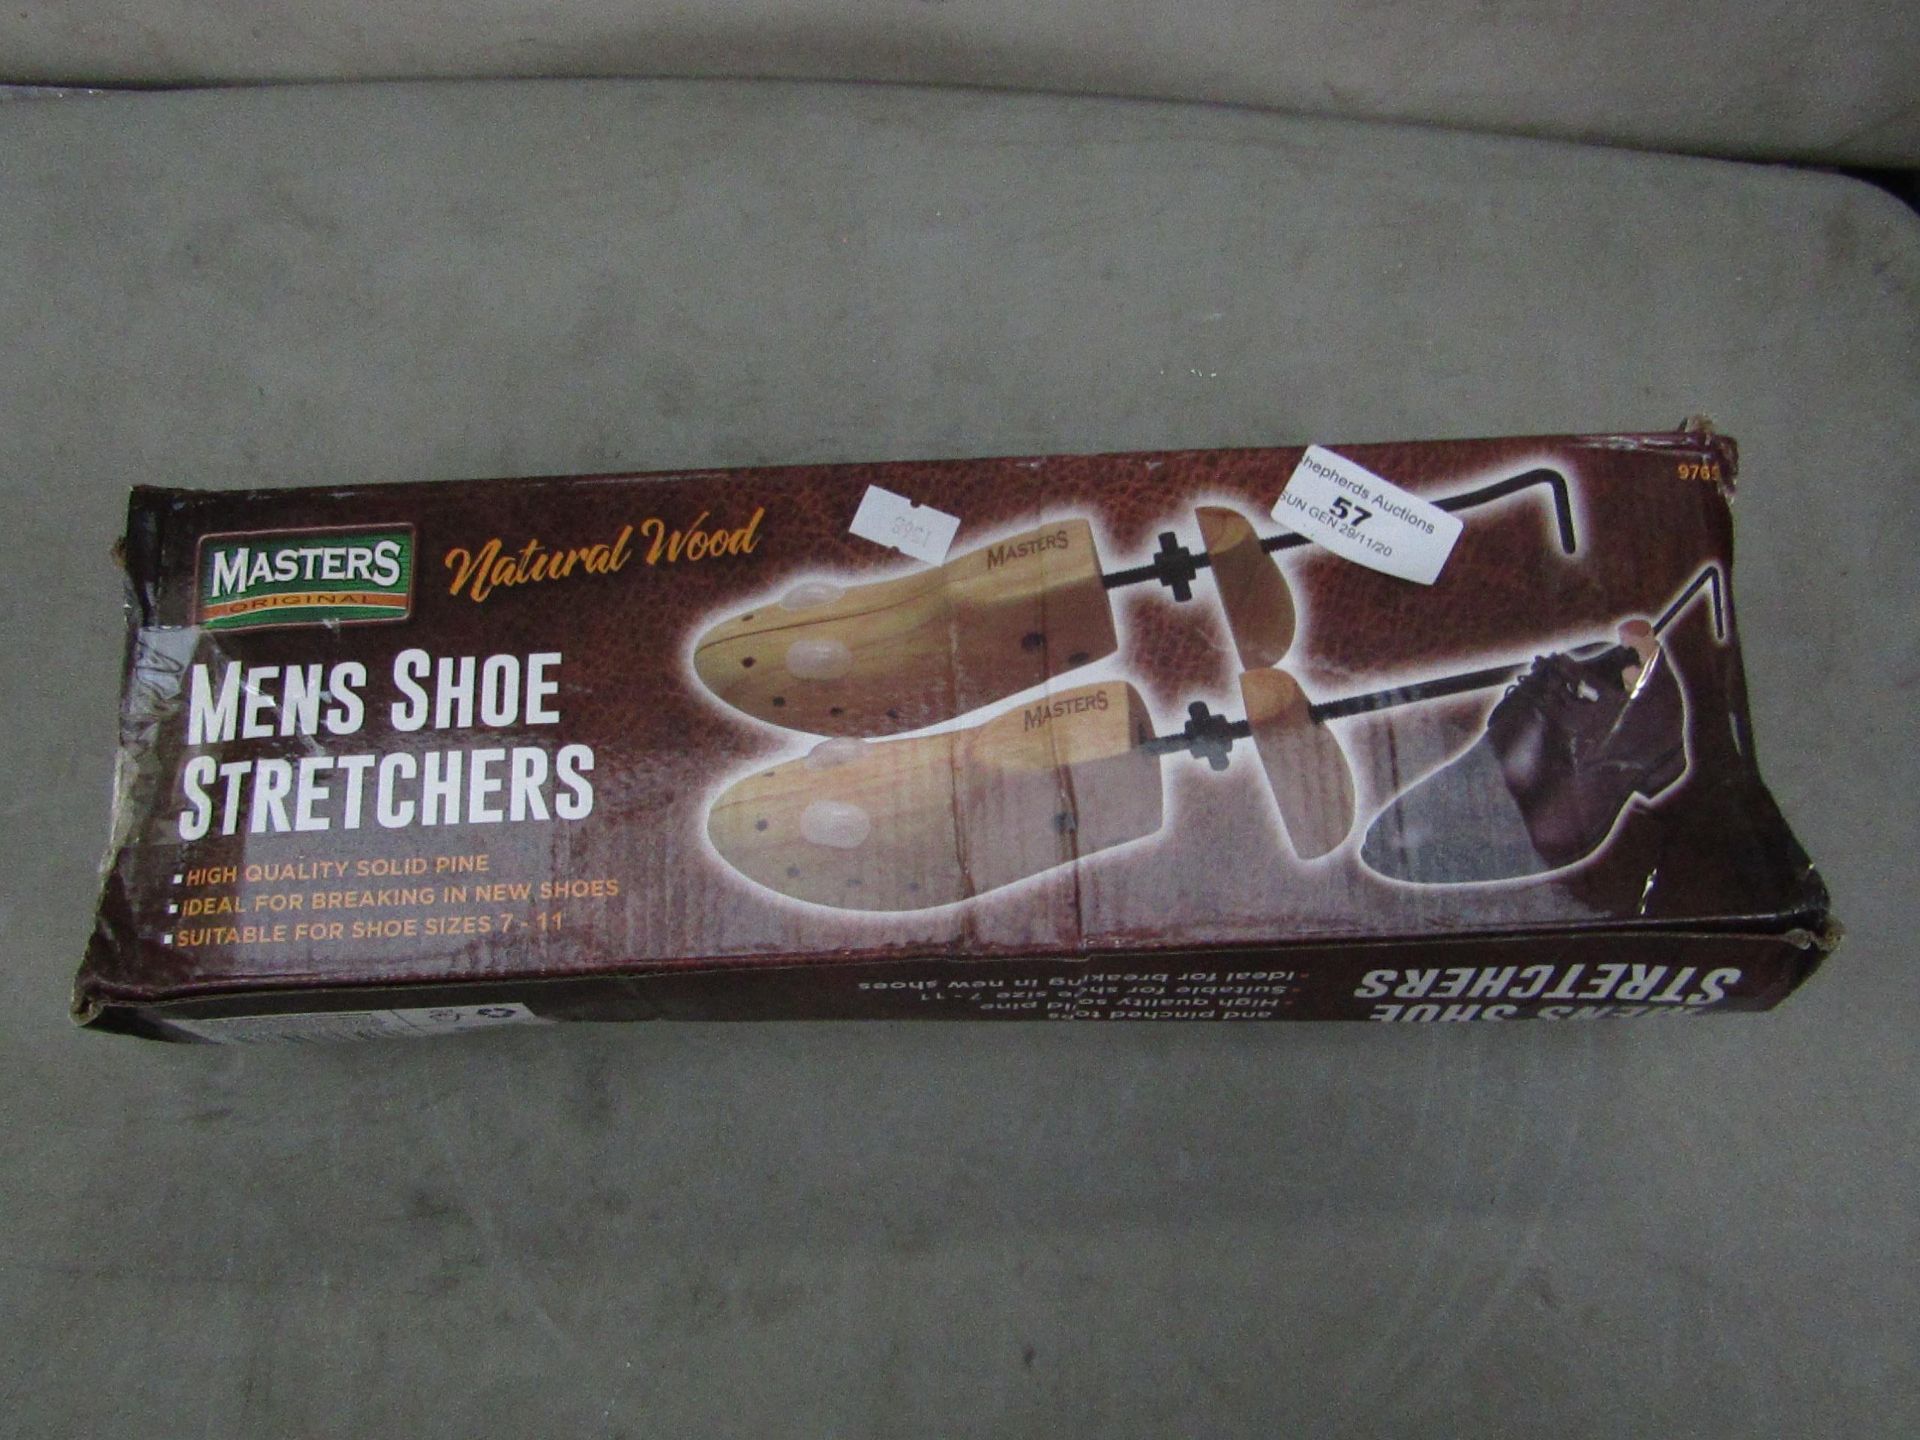 Masters - Mens Shoe Stretchers - Unused & Boxed.